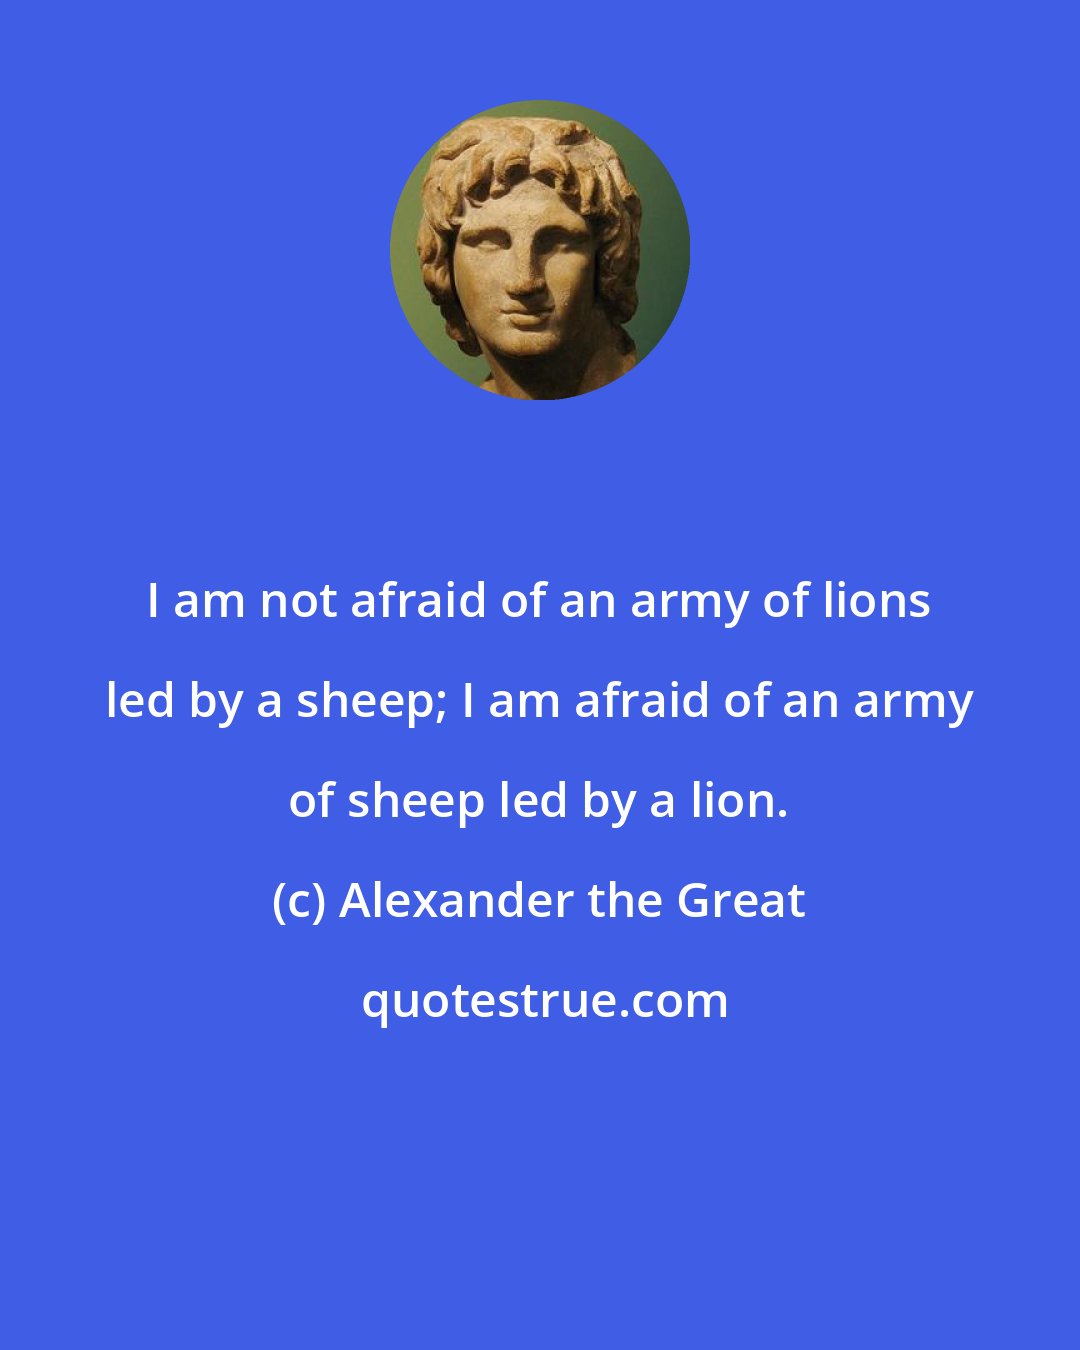 Alexander the Great: I am not afraid of an army of lions led by a sheep; I am afraid of an army of sheep led by a lion.